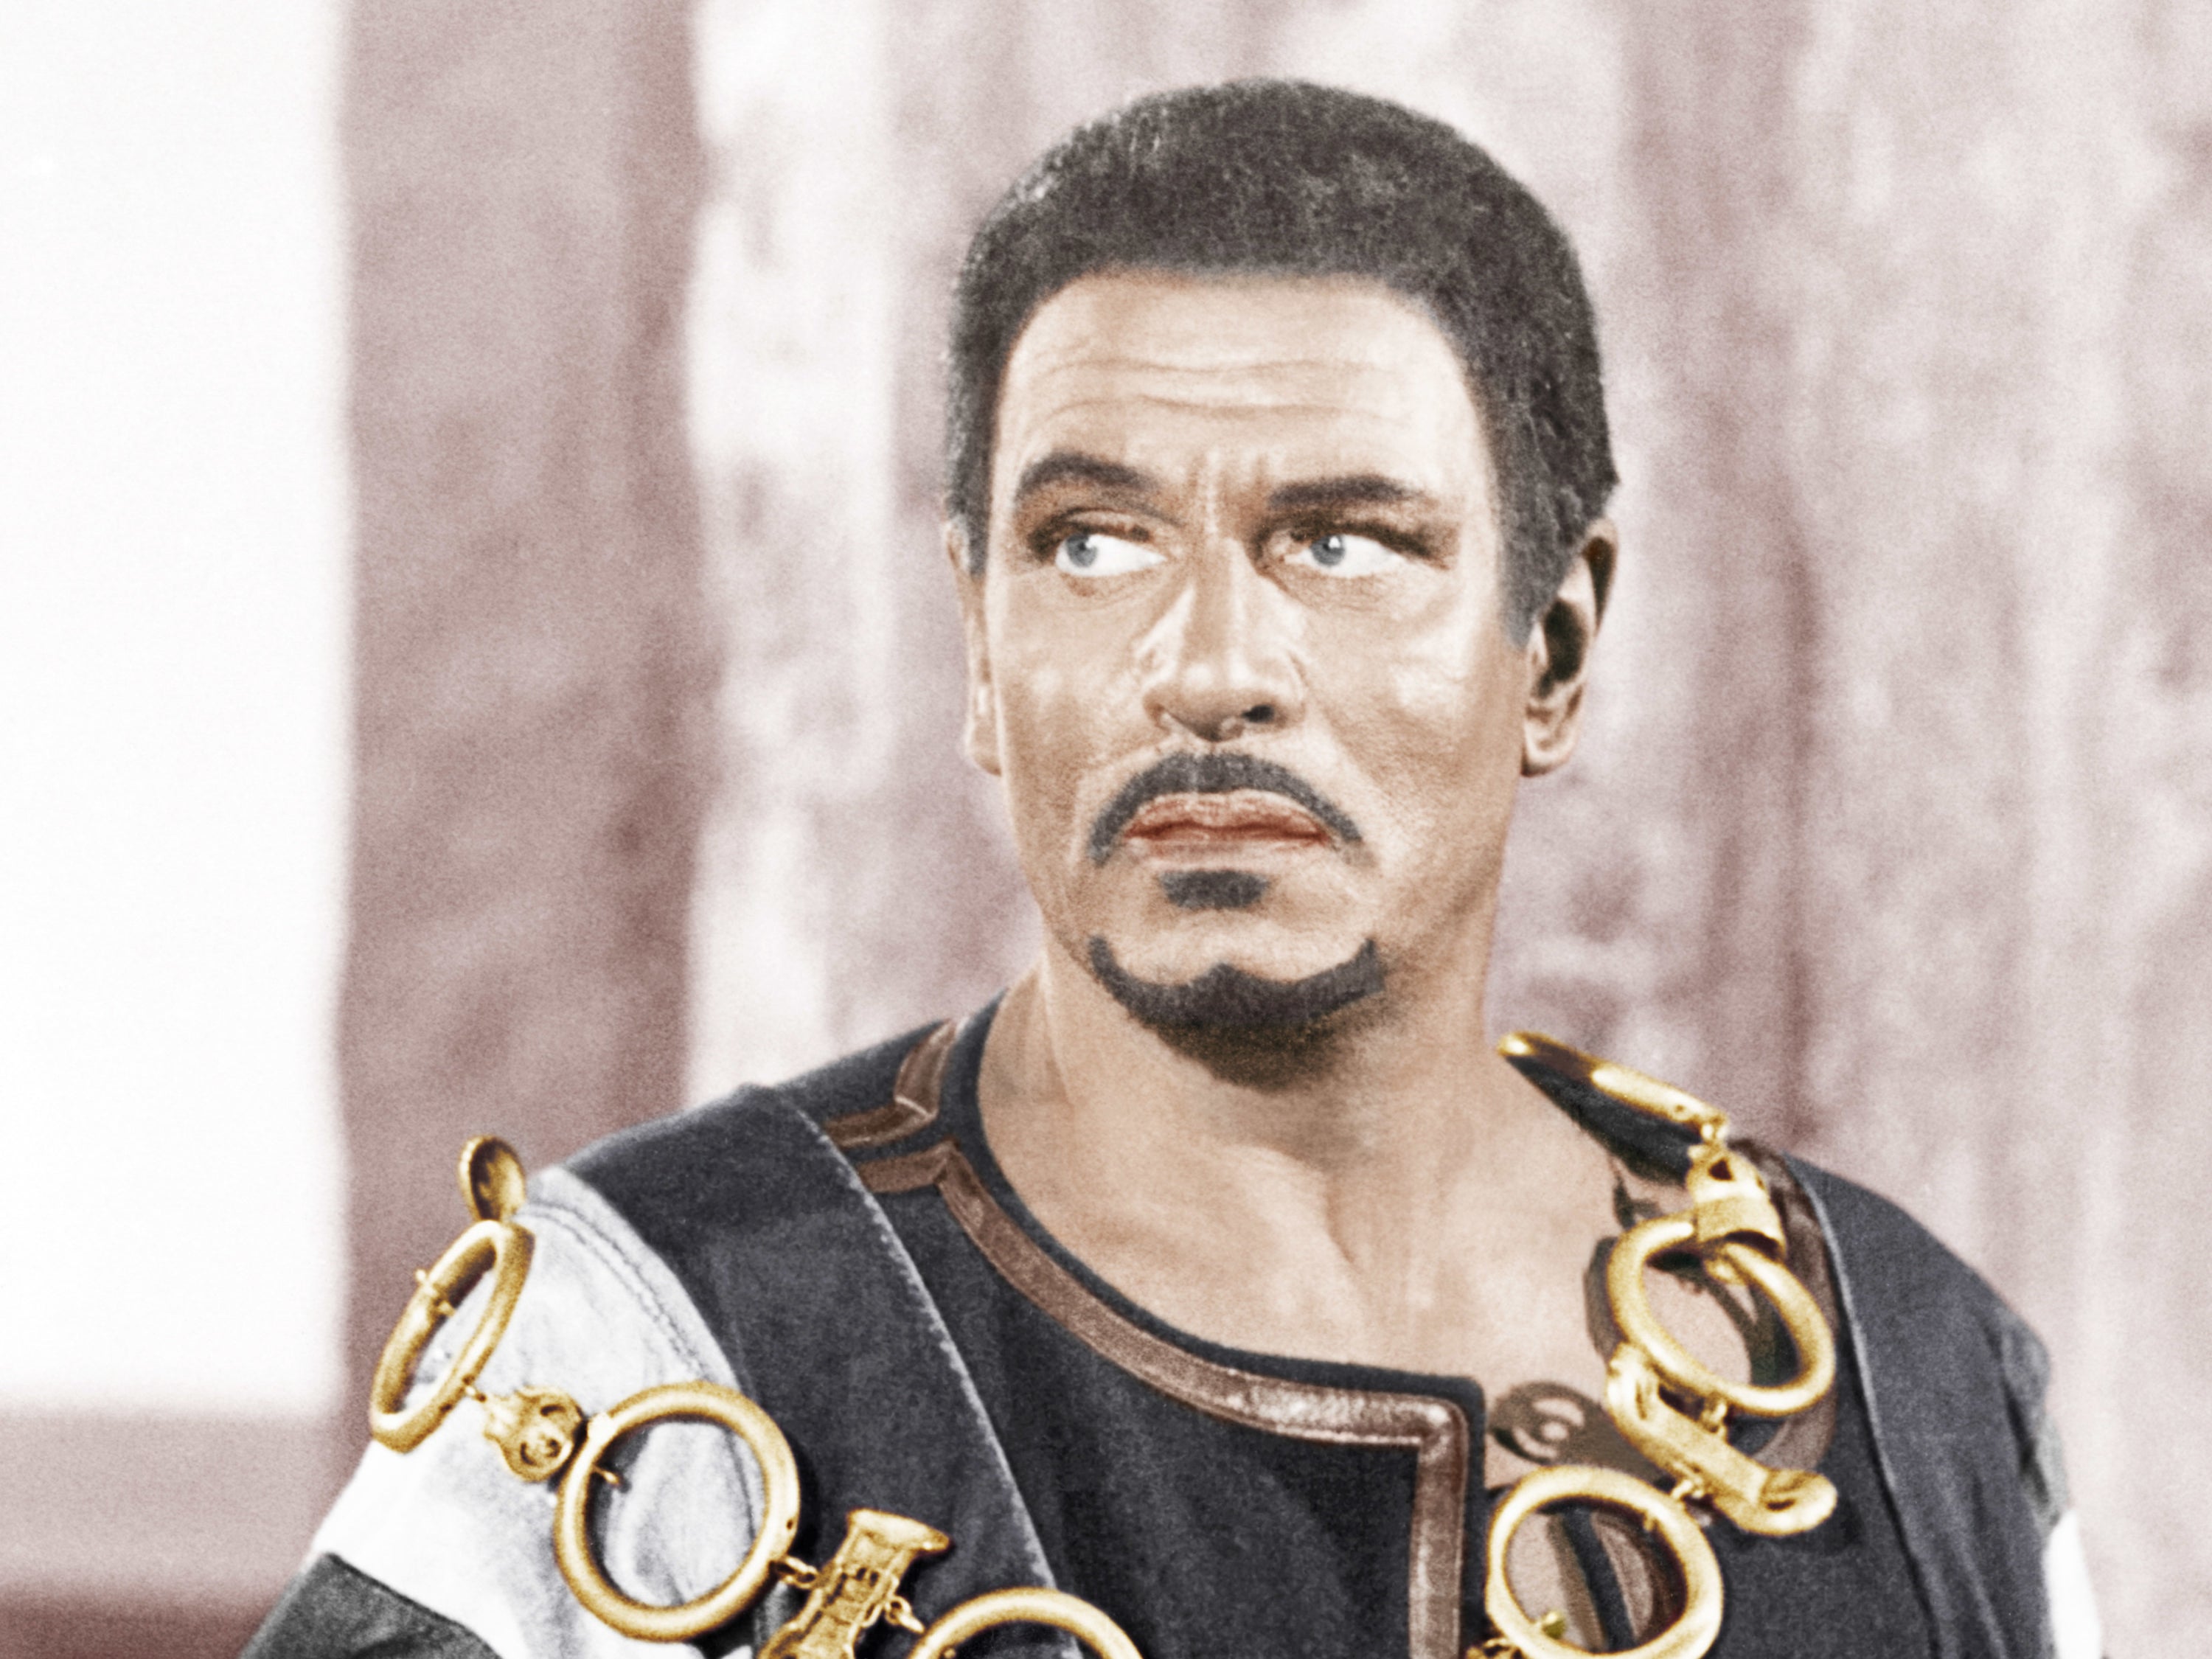 laurence olivier in othello